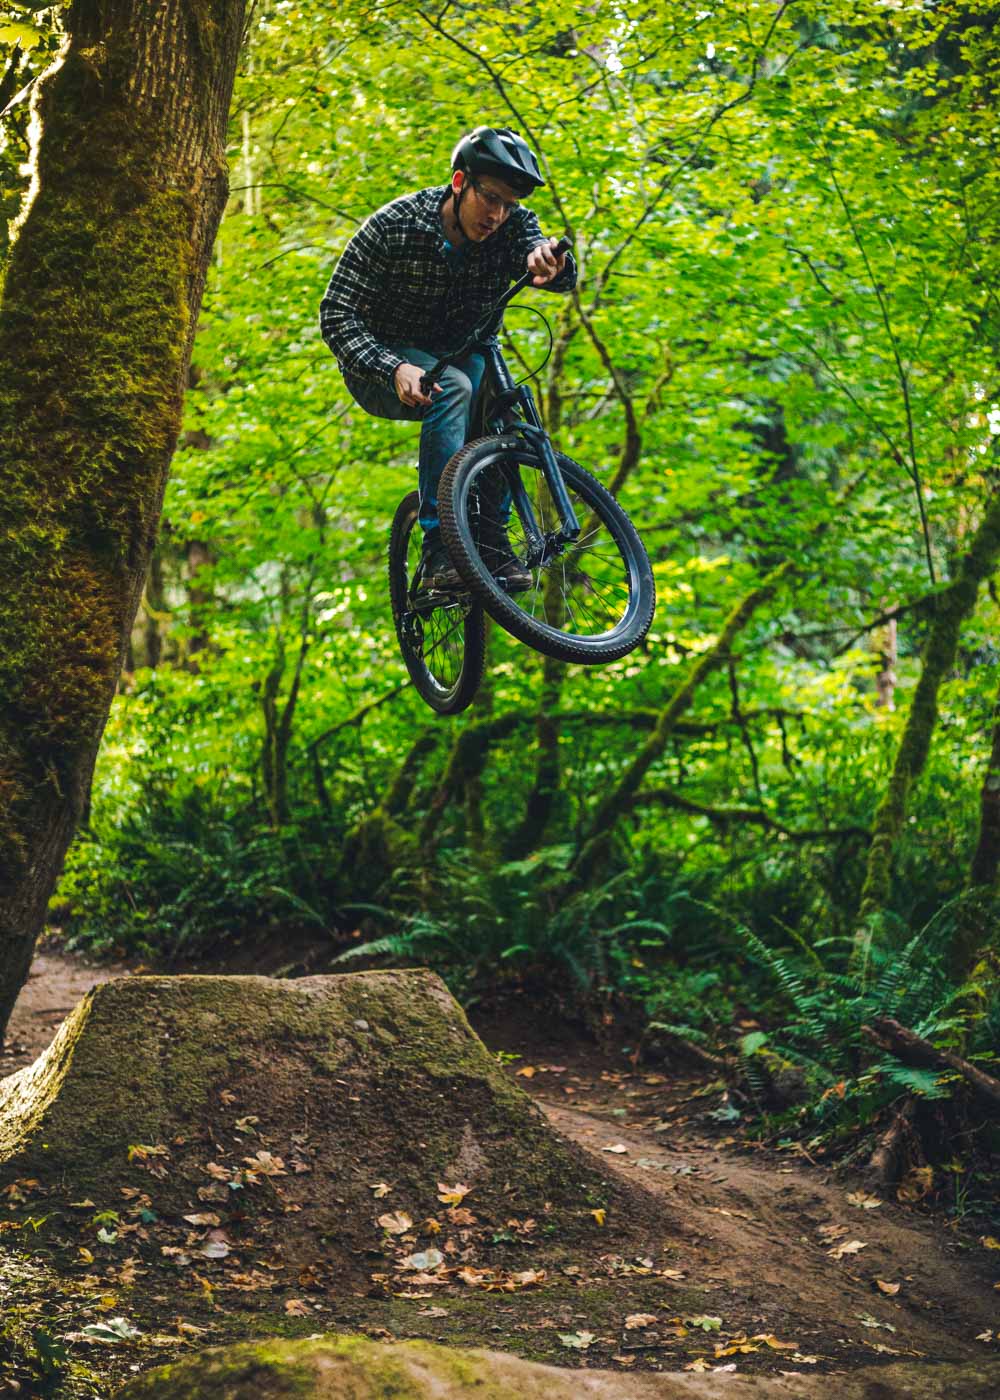 A man on a mountain bike in mid-air after jumping off a dirt jump int he middle of the forest.